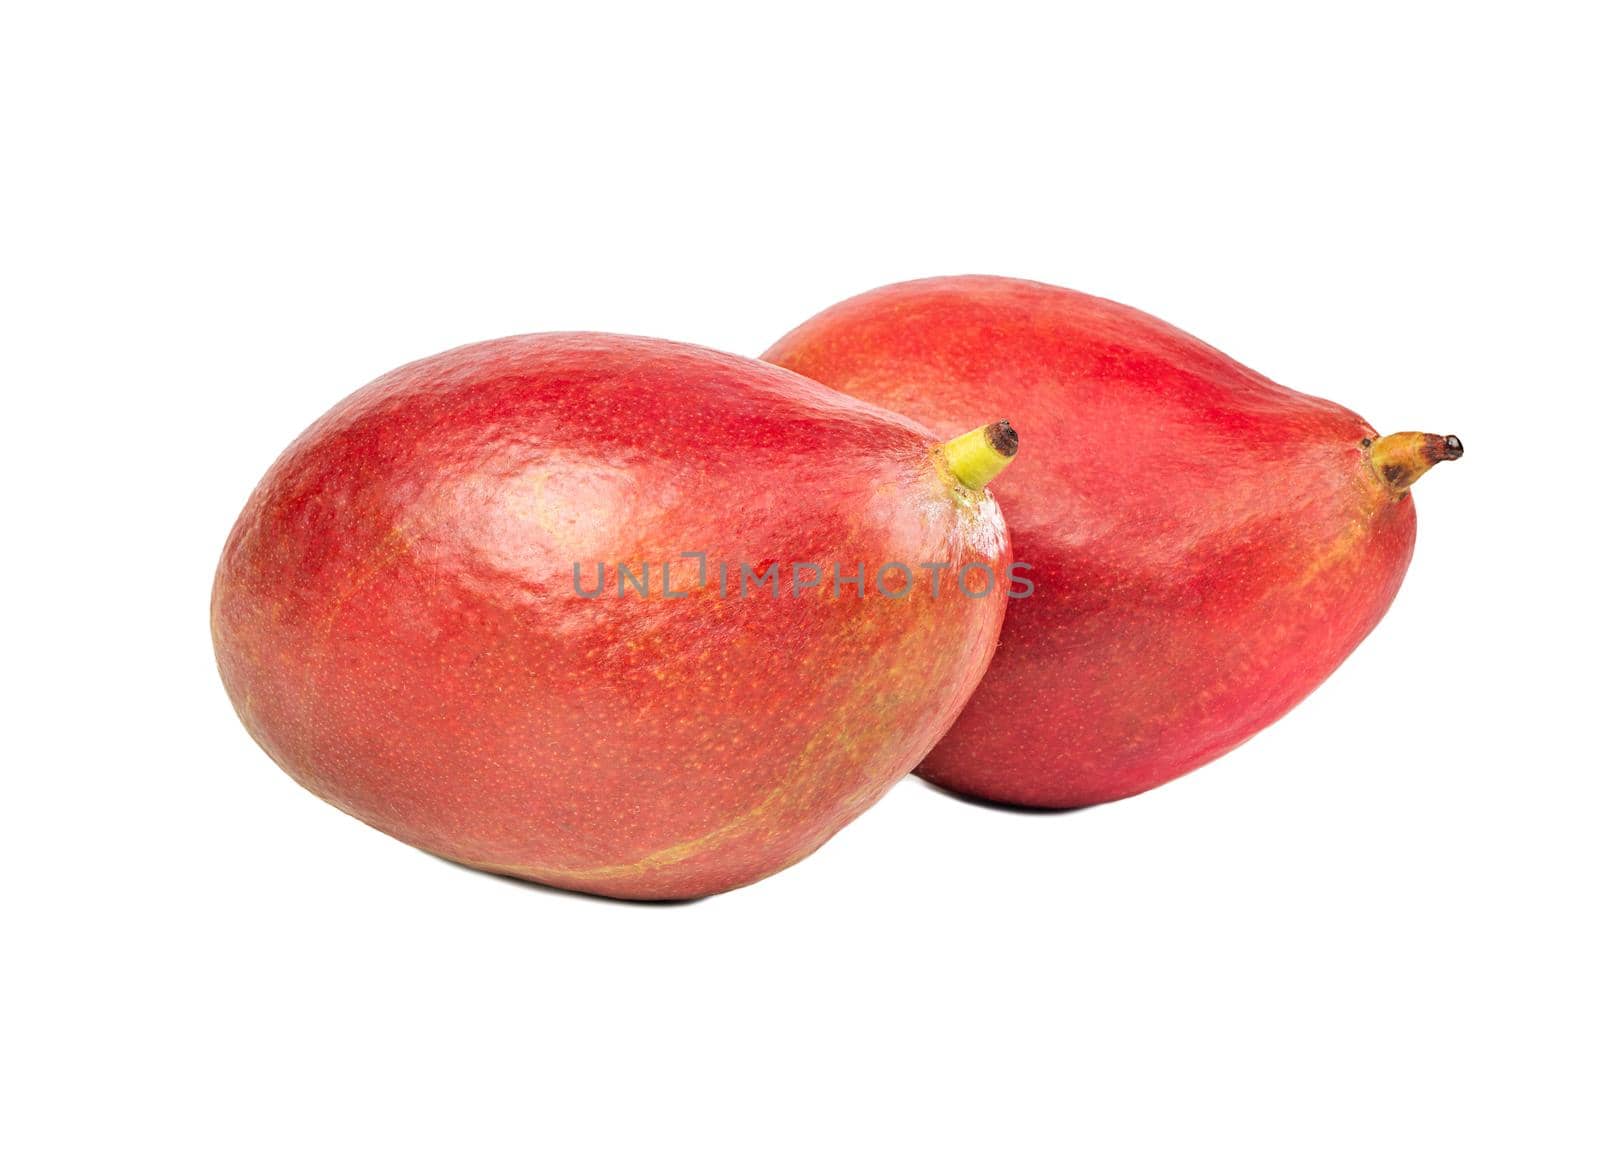 Two delicious red mango fruit isolated on a white background